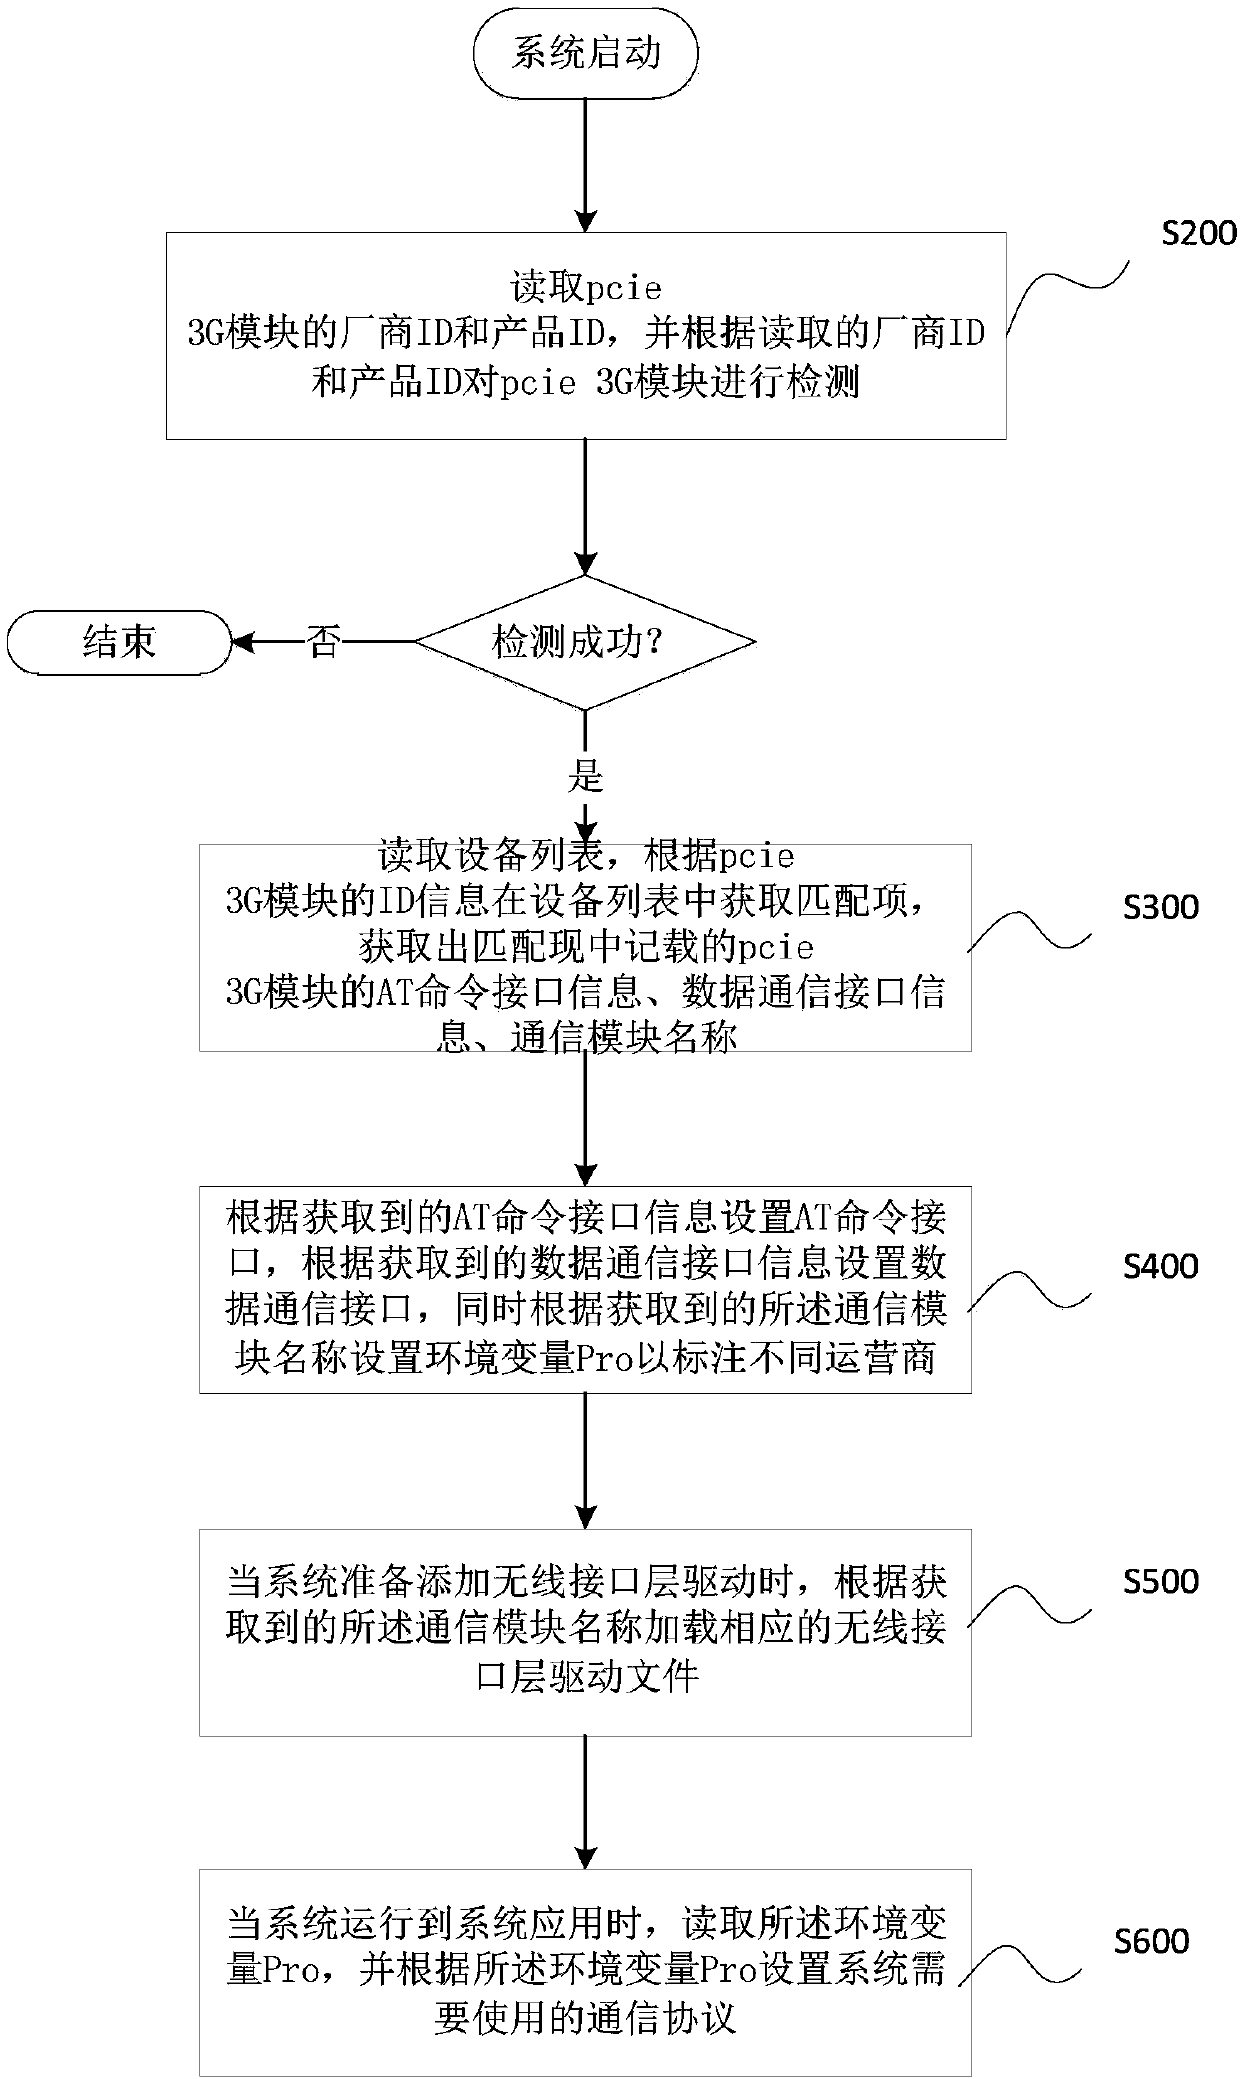 Network communication control method and system for industrial personal computer